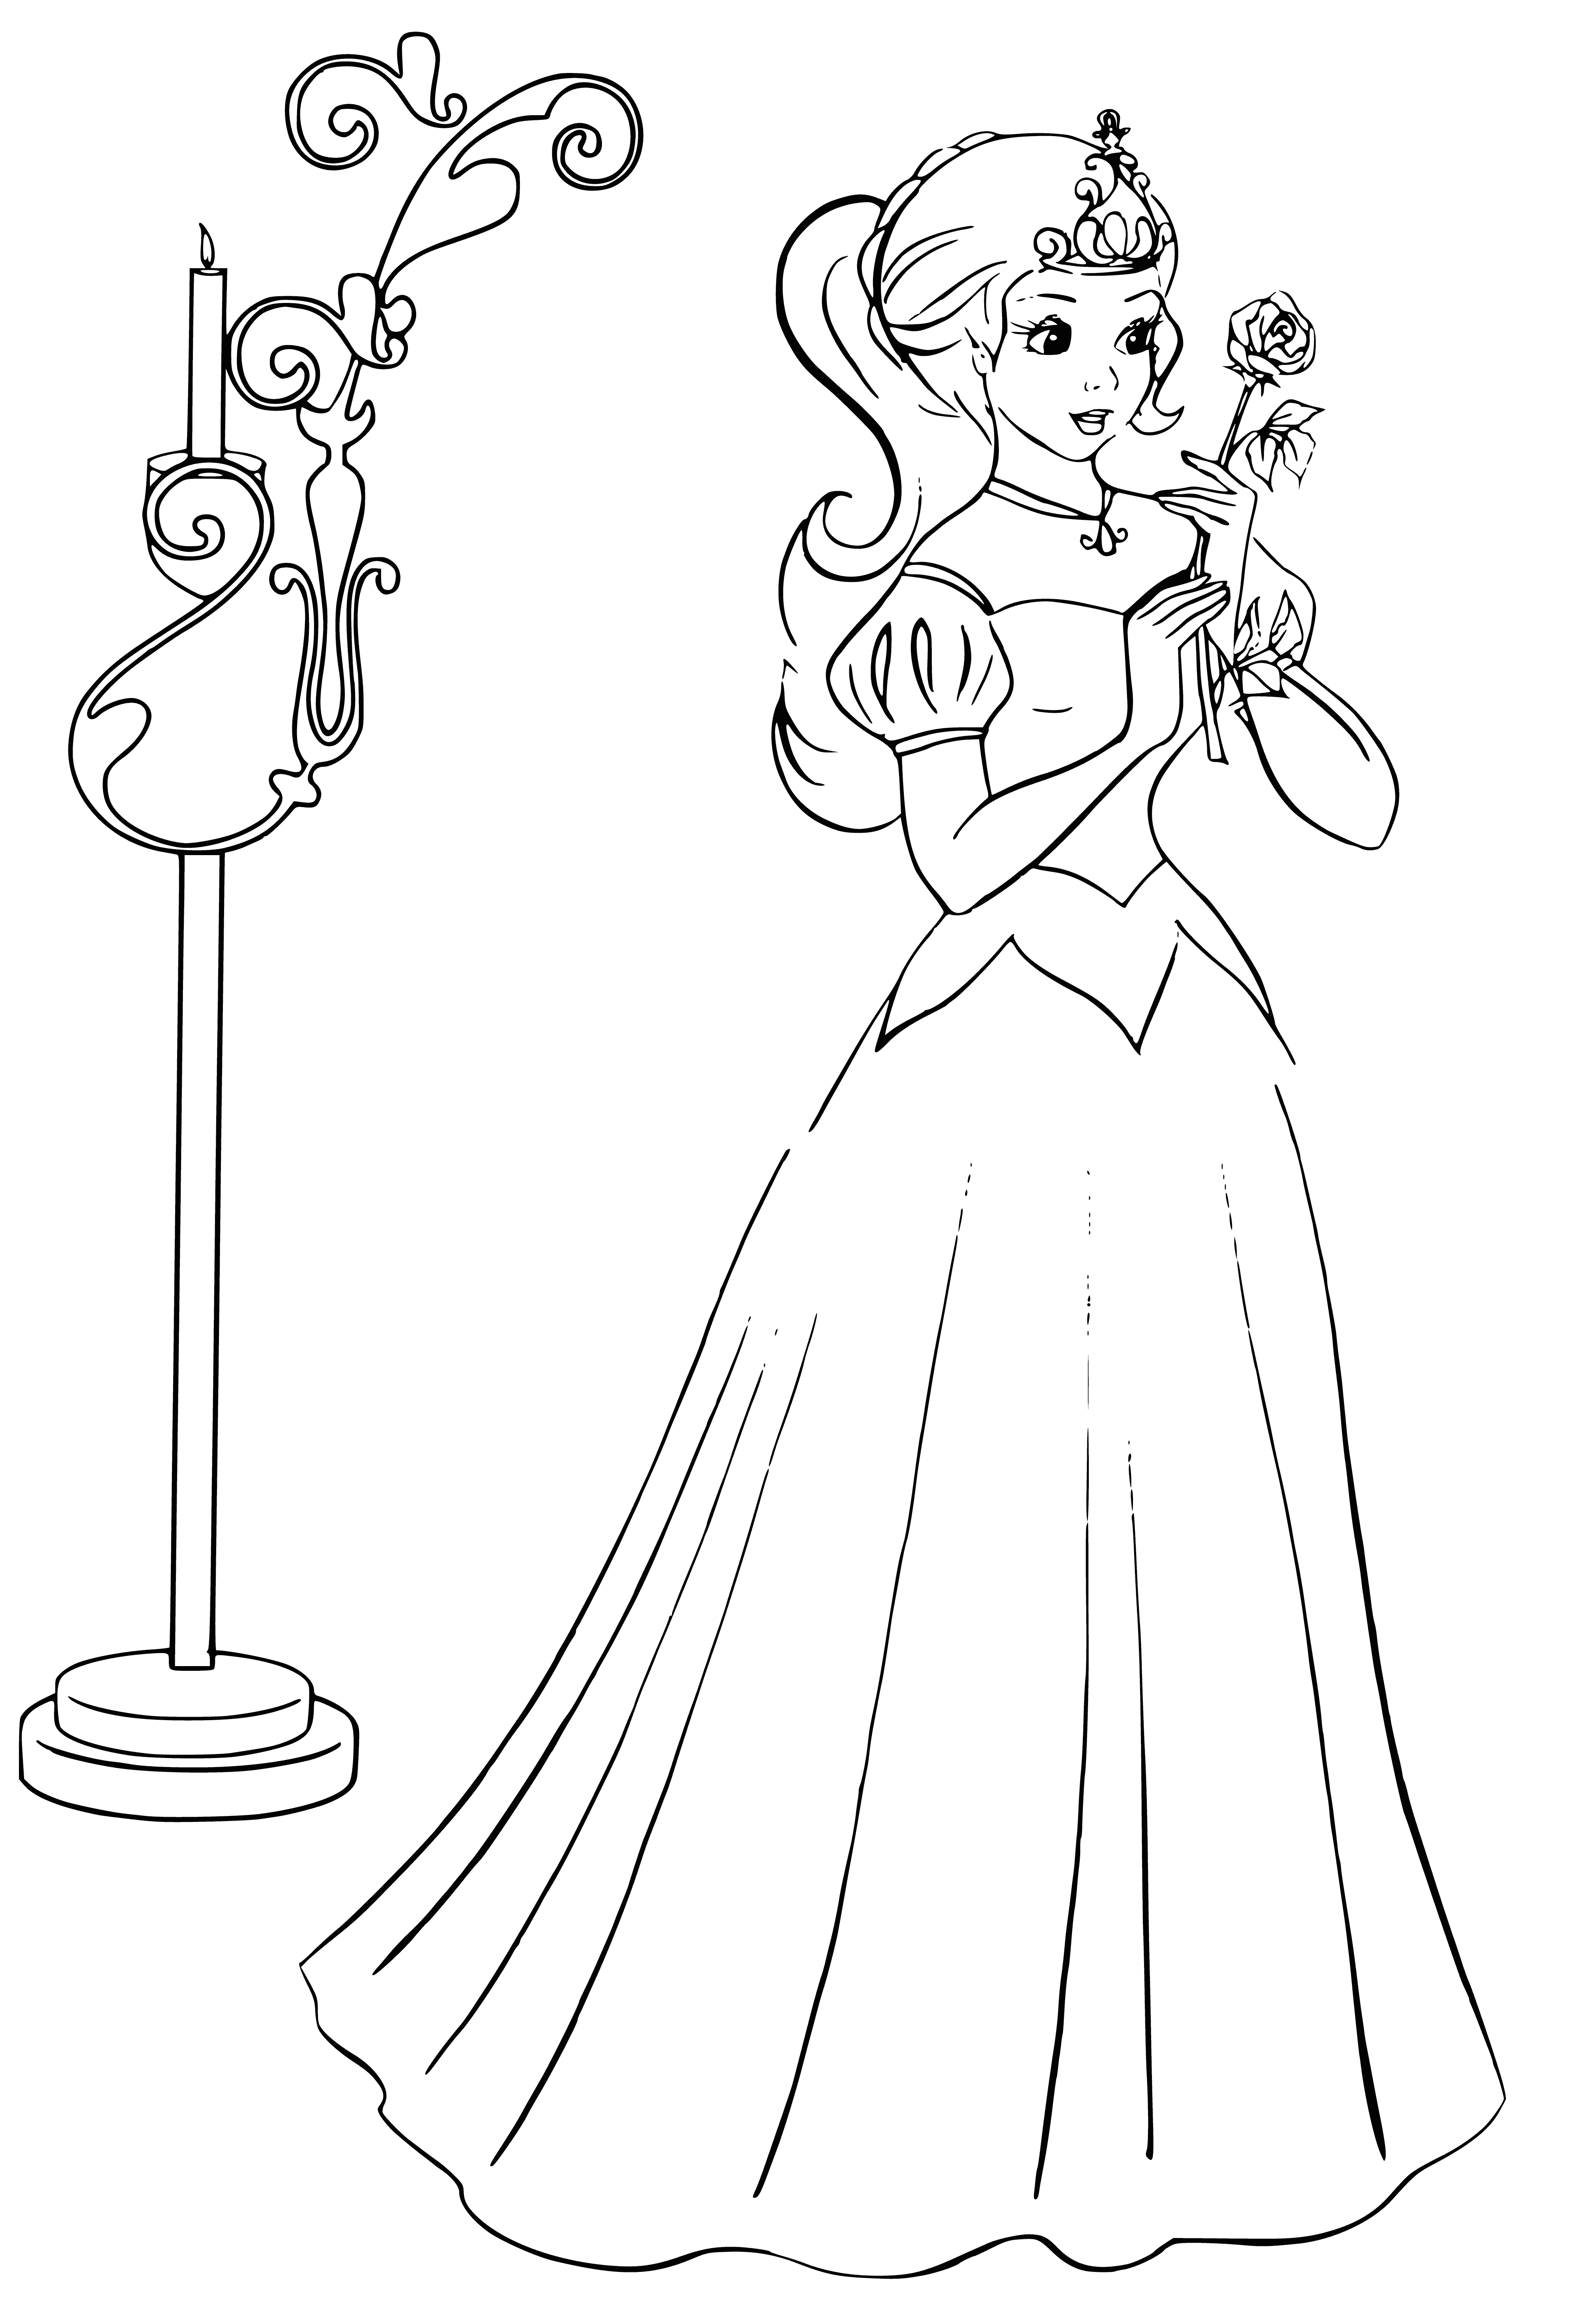 coloring page: Young princess in a sunny field holding a flower, wearing a white dress and a golden crown.